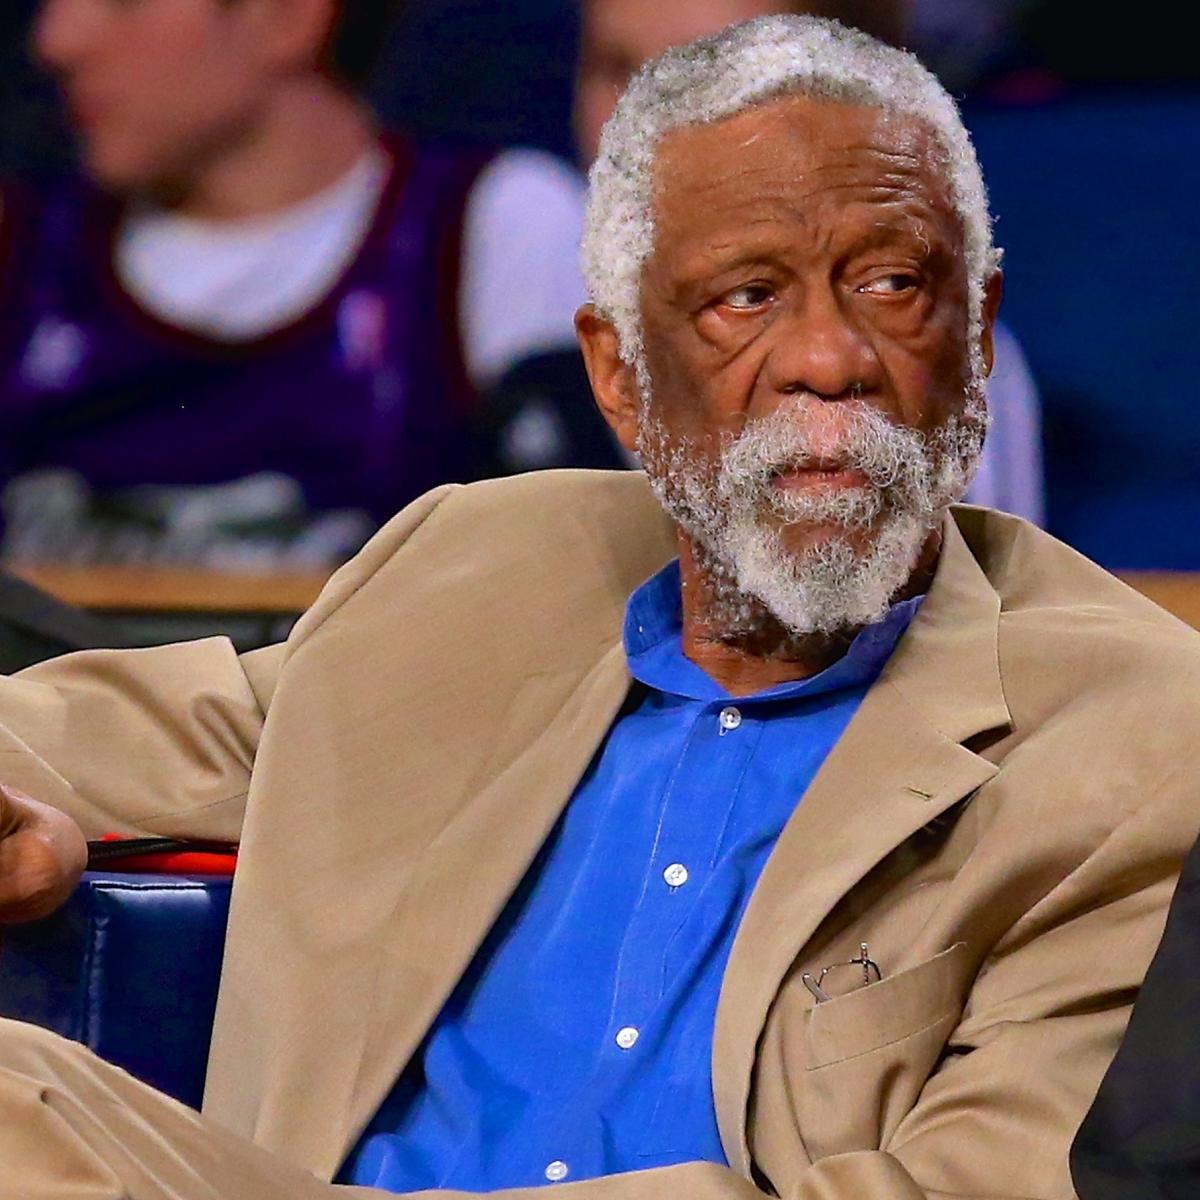 Bill Russell Recovering After Collapsing at Speaking Engagement